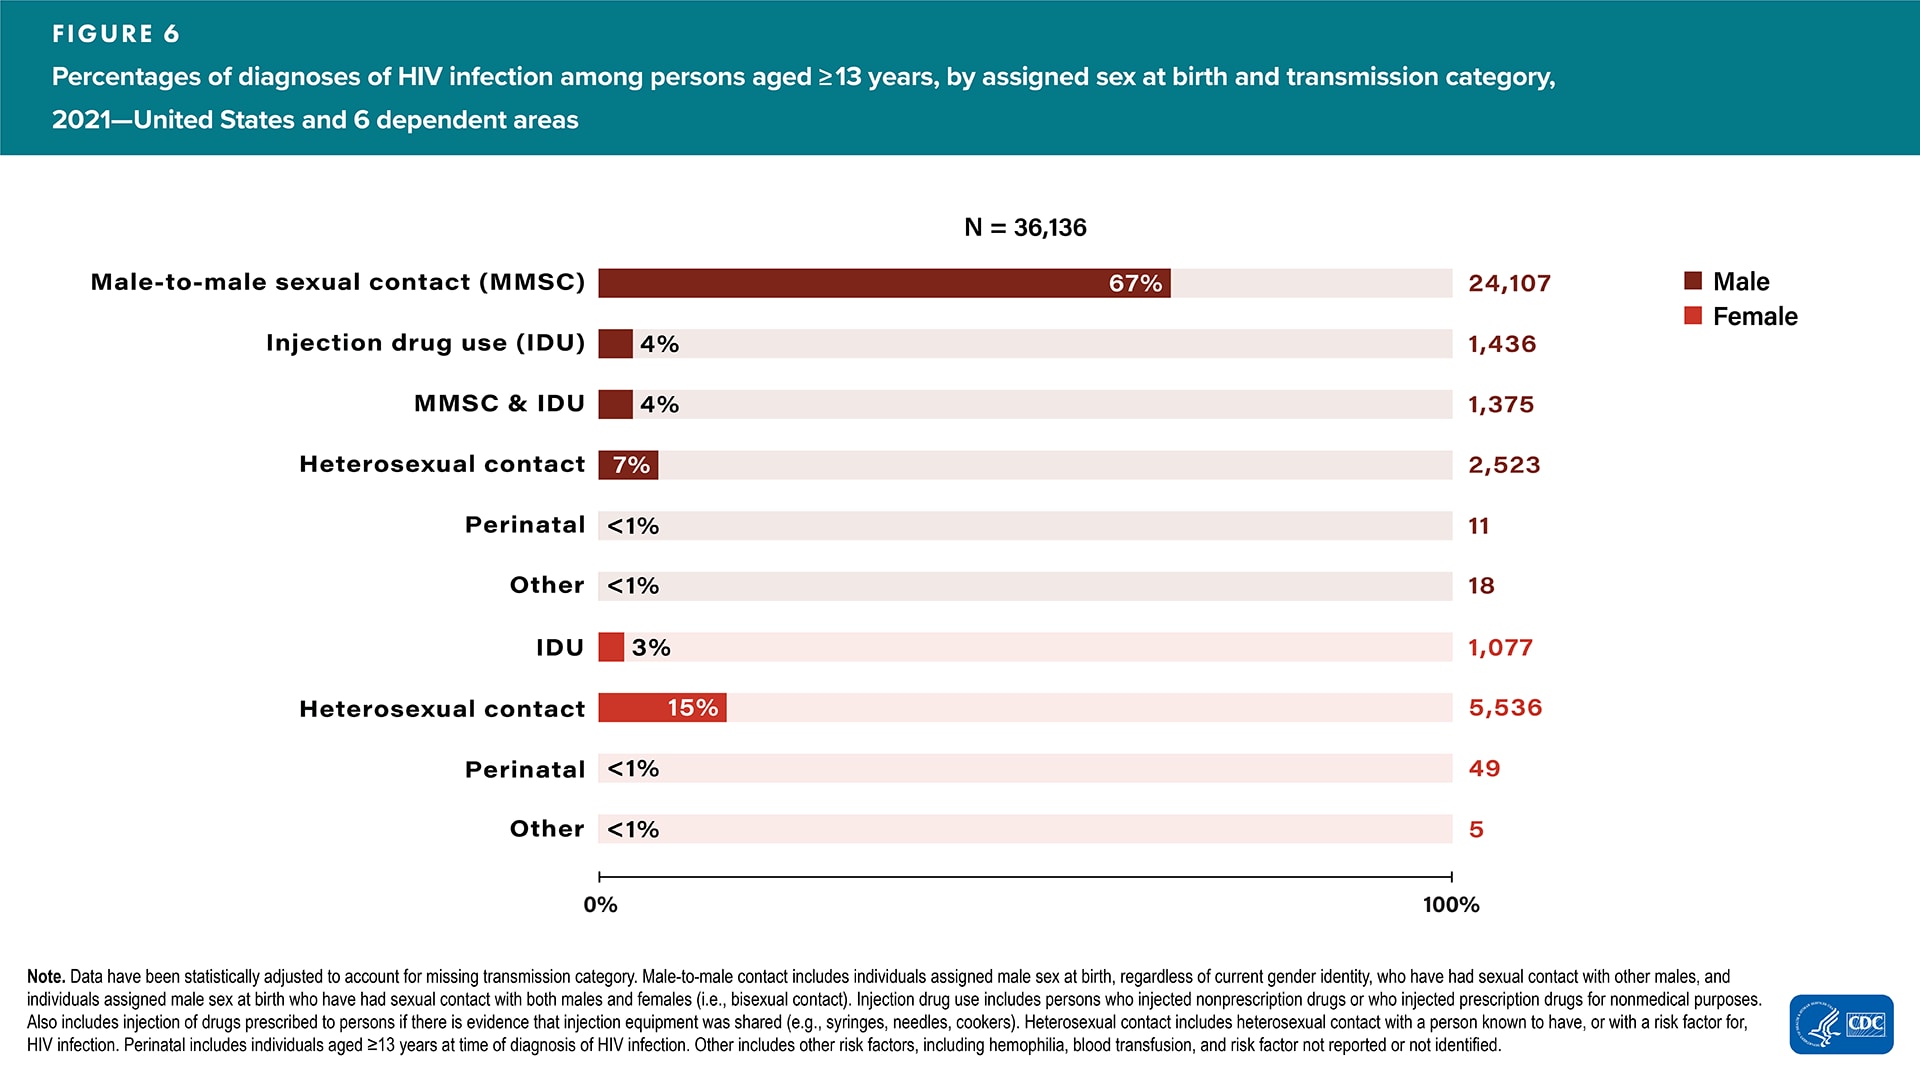 In 2021, in the United States and 6 dependent areas, 67% of HIV diagnoses were attributed to male-to-male sexual contact (MMSC).